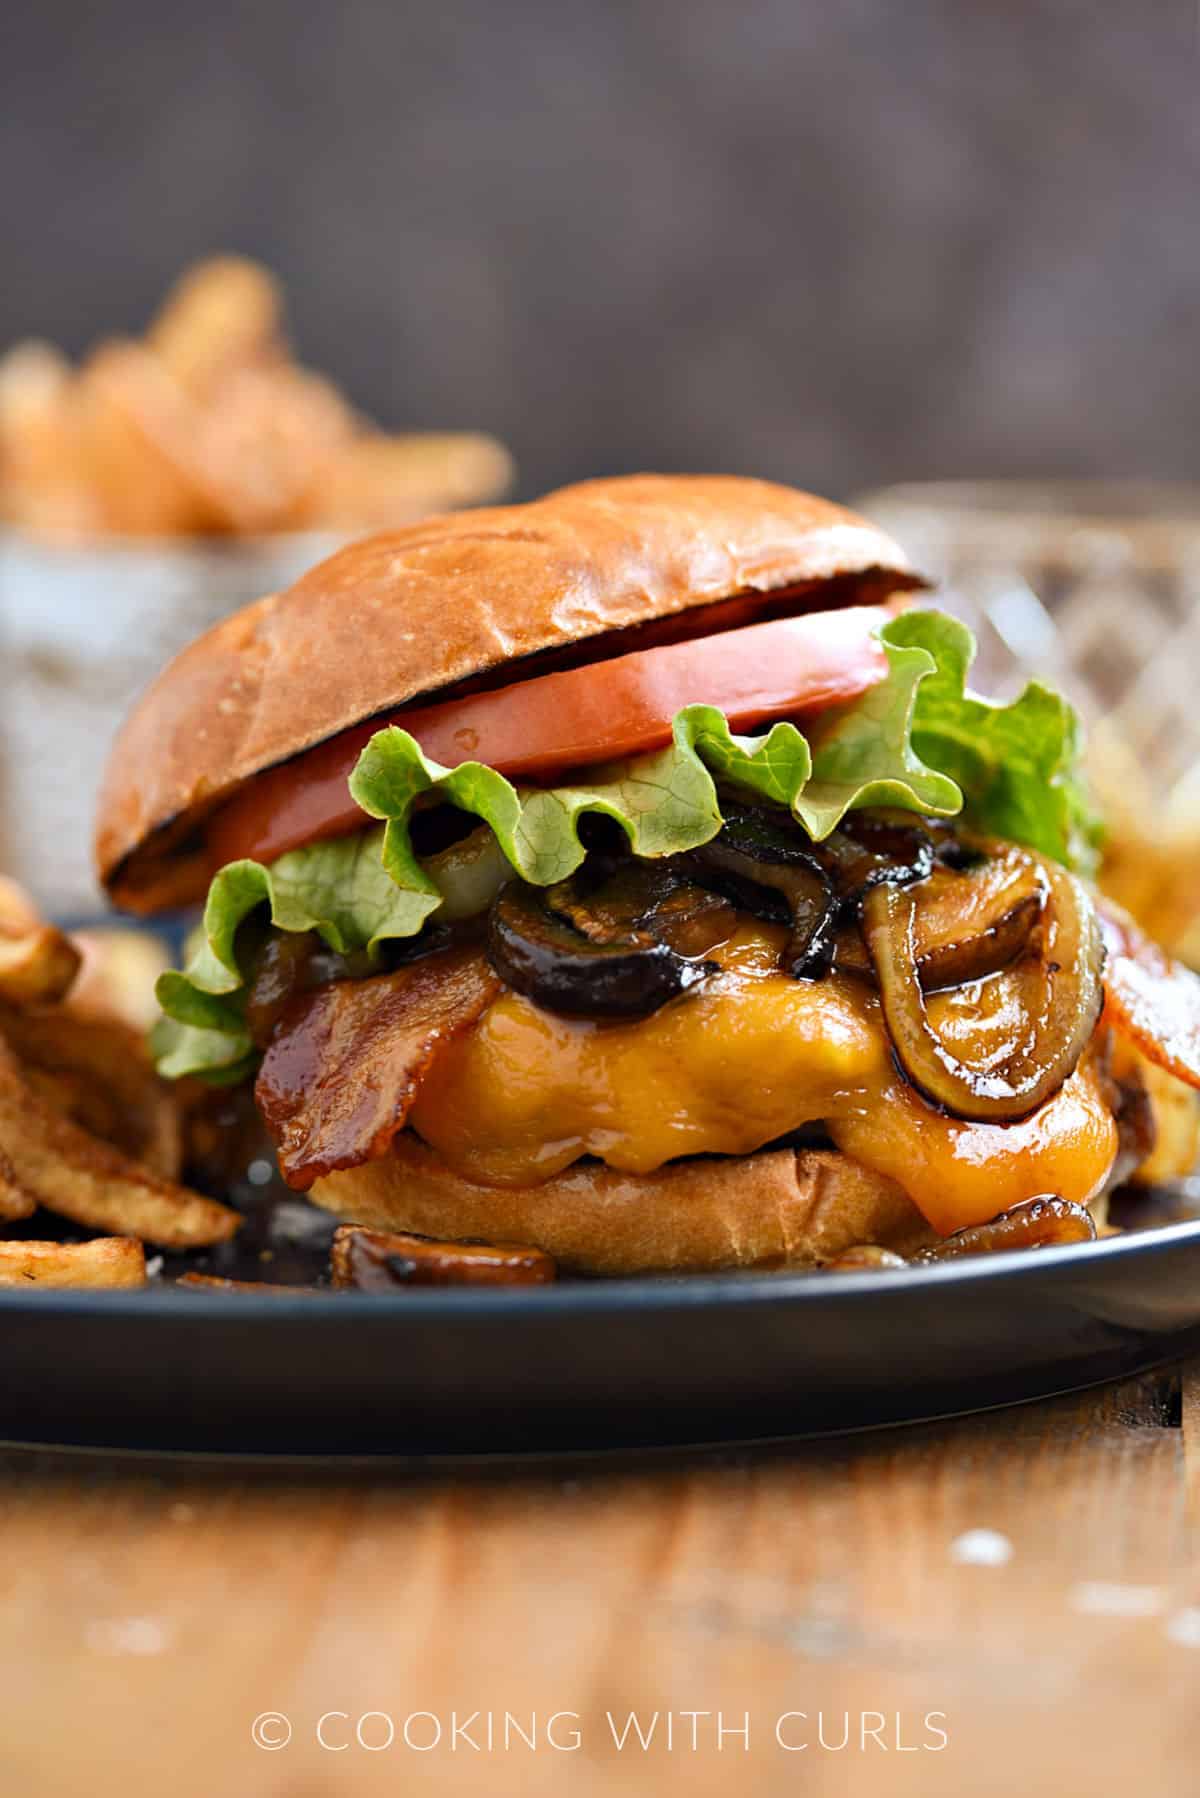 A burger topped with melted cheddar cheese, caramelized onions and mushrooms, lettuce , tomato, and whiskey glaze with fries on the side.